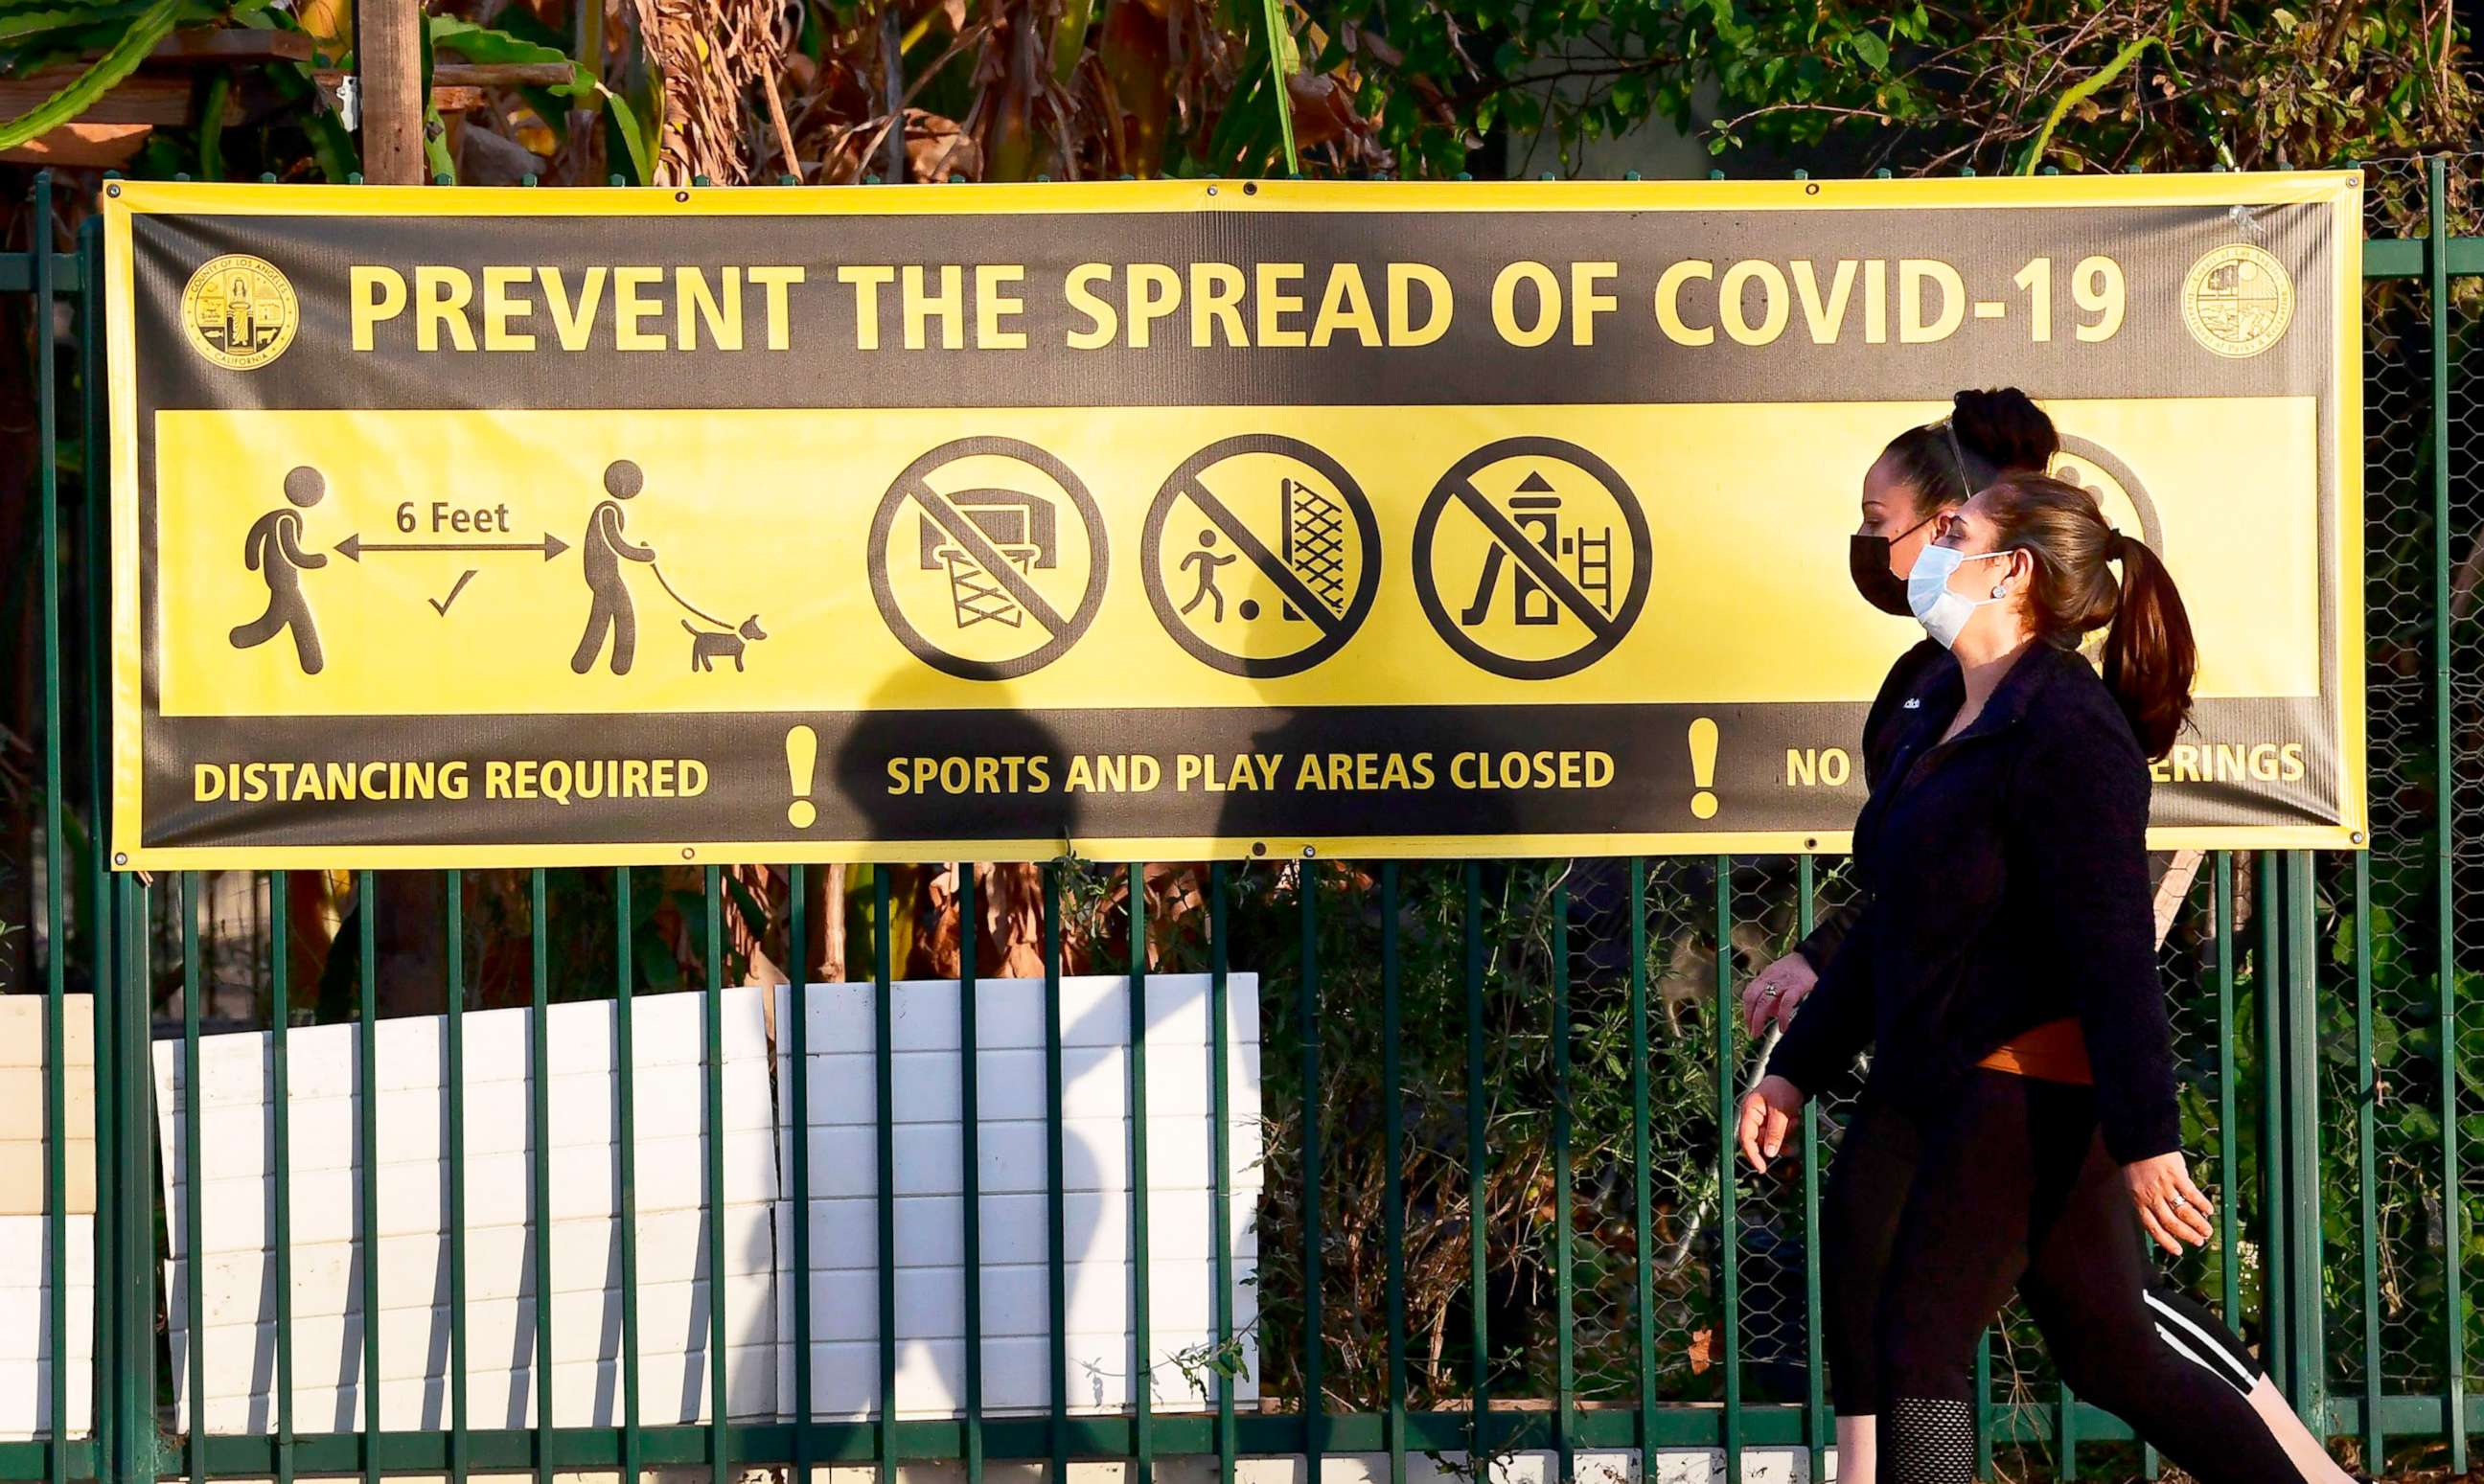 PHOTO: Pedestrians wearing facemasks walk past a prevent the spread of Covid-19 banner in Los Angeles, Jan. 19, 2020.